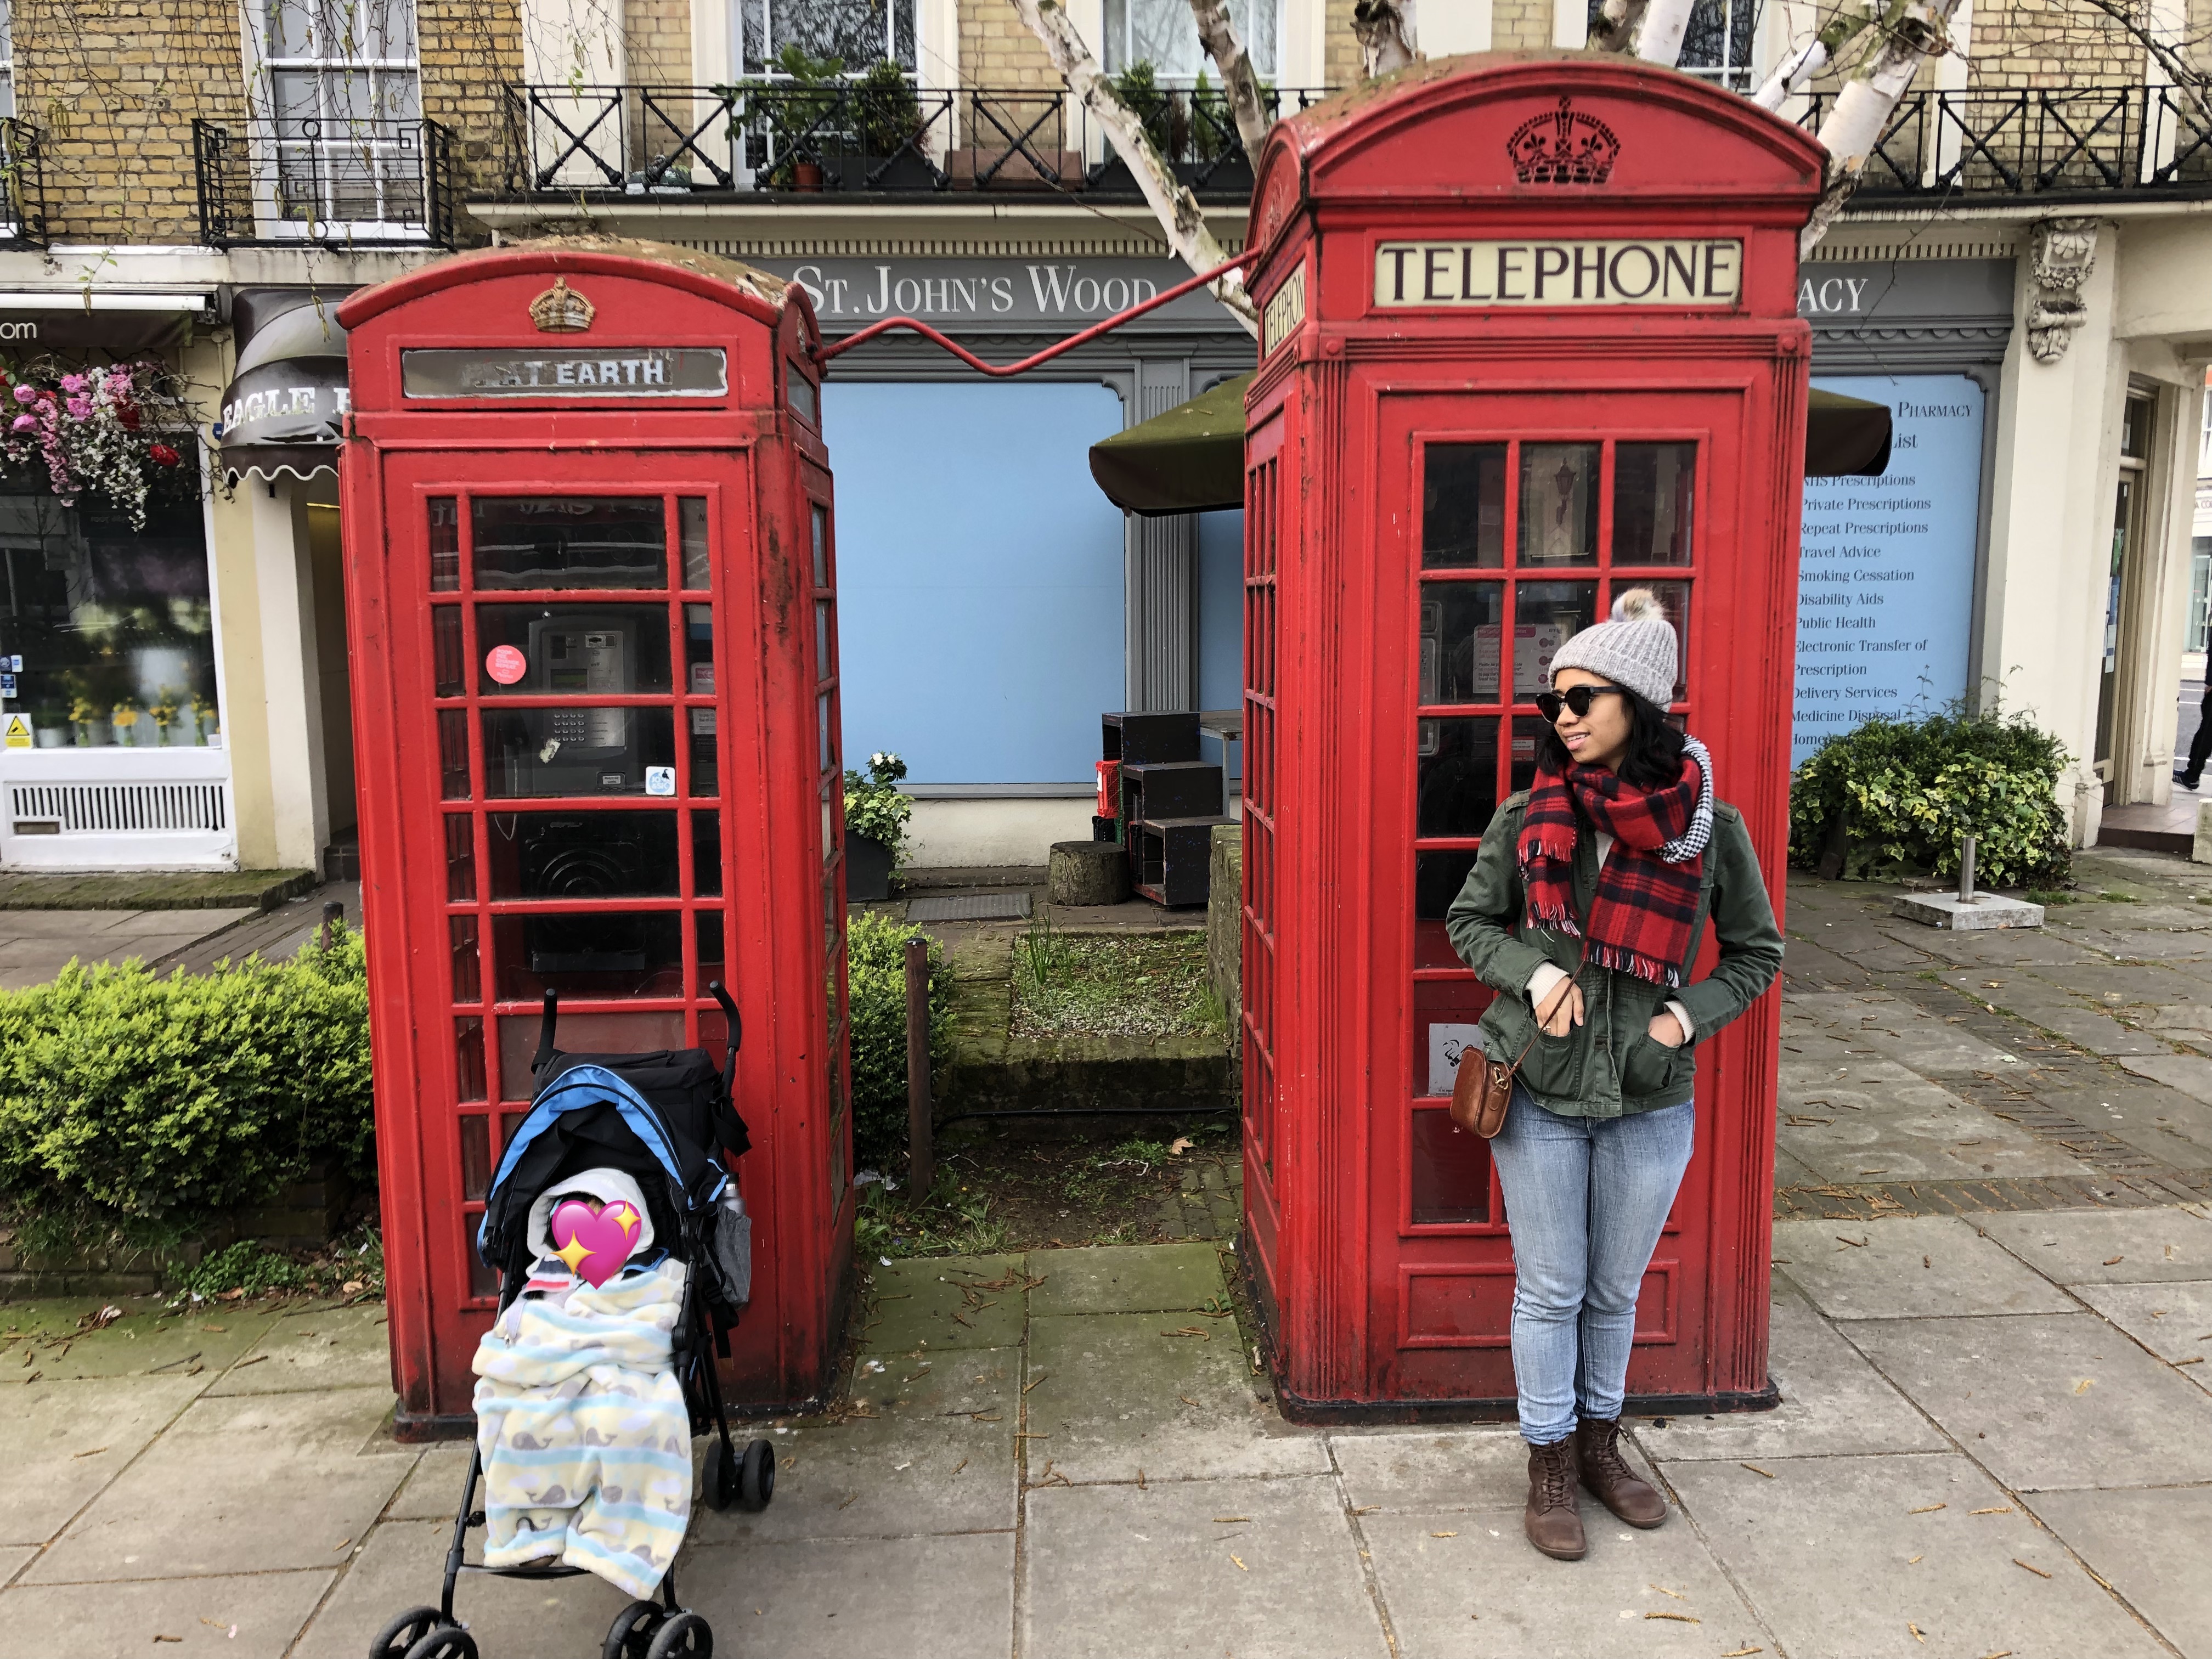 Angelica and her child (sitting in a stroller) each stand in front of two red telephone booths in London.